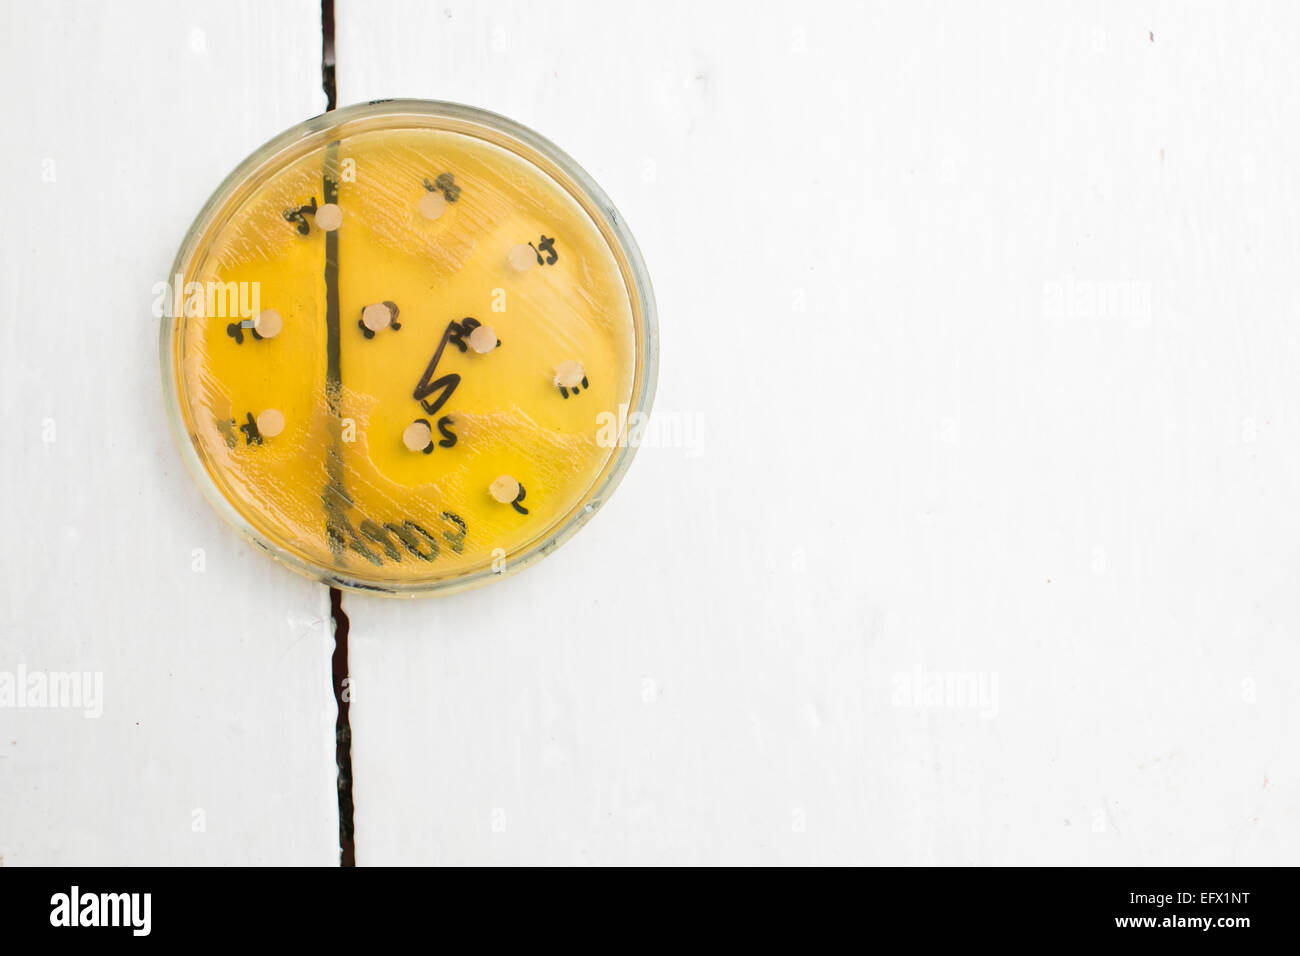 Petri dish with bacteria growing in it Stock Photo